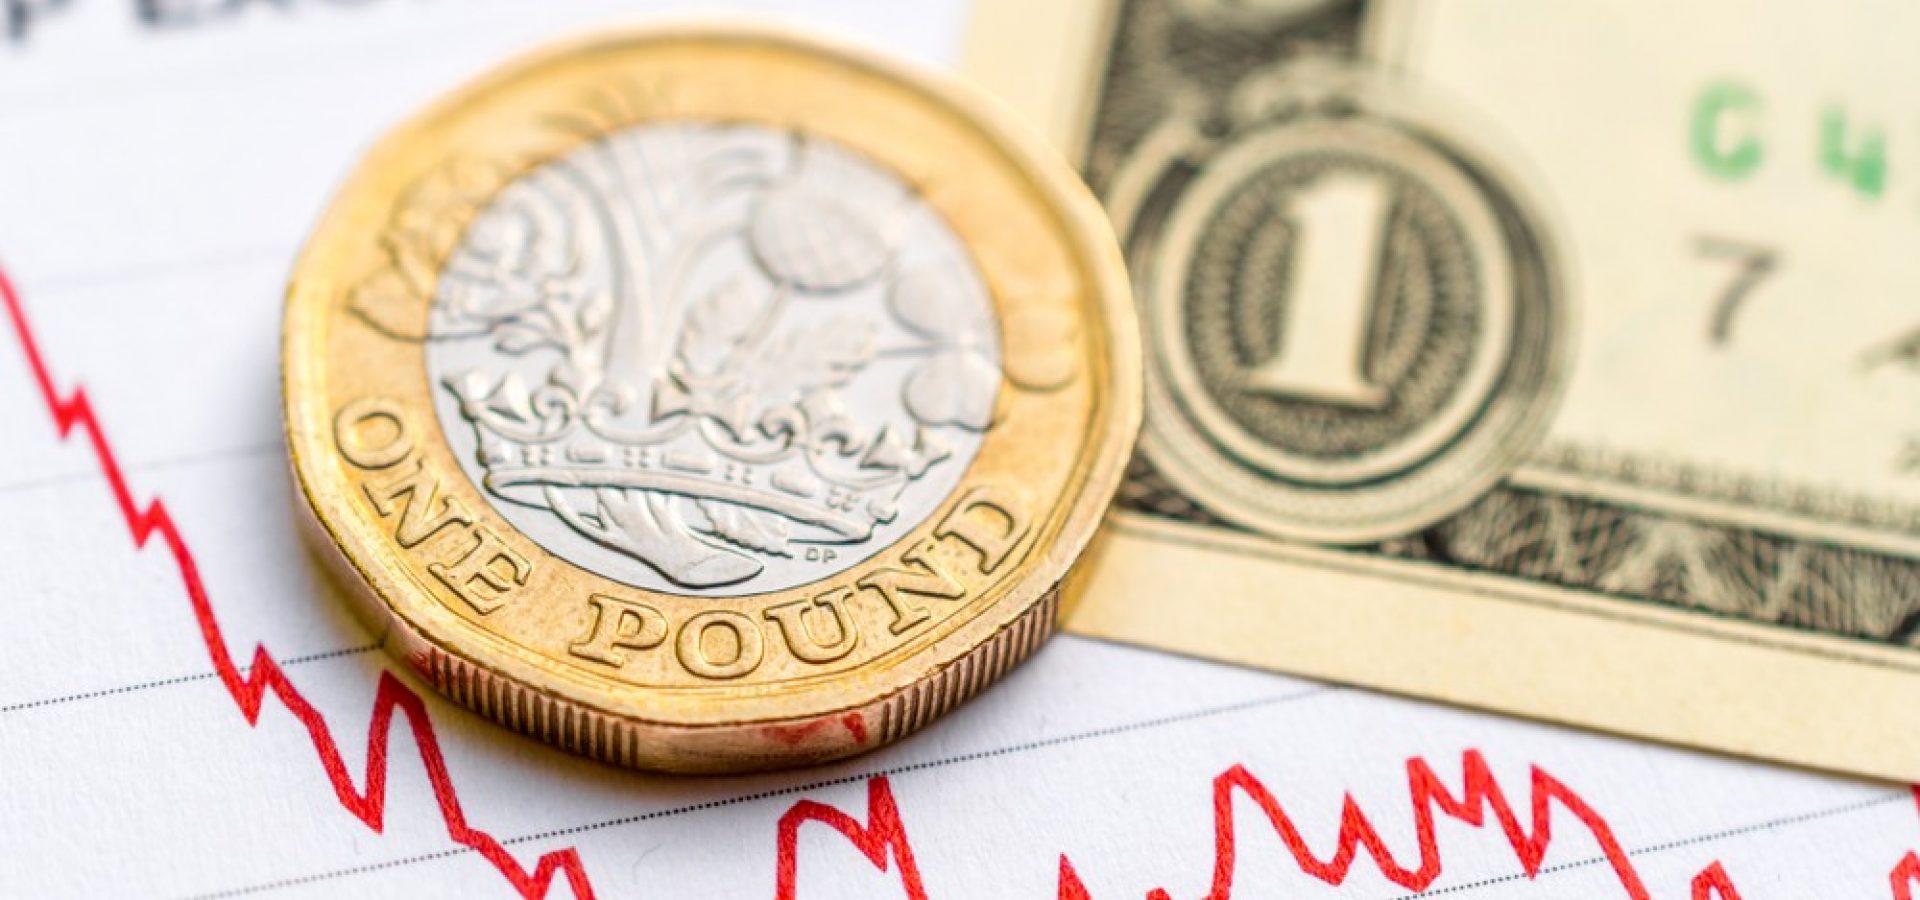 Wibest – GBP USD Exchange Rate: British pound coin and US dollar bill over a chart.